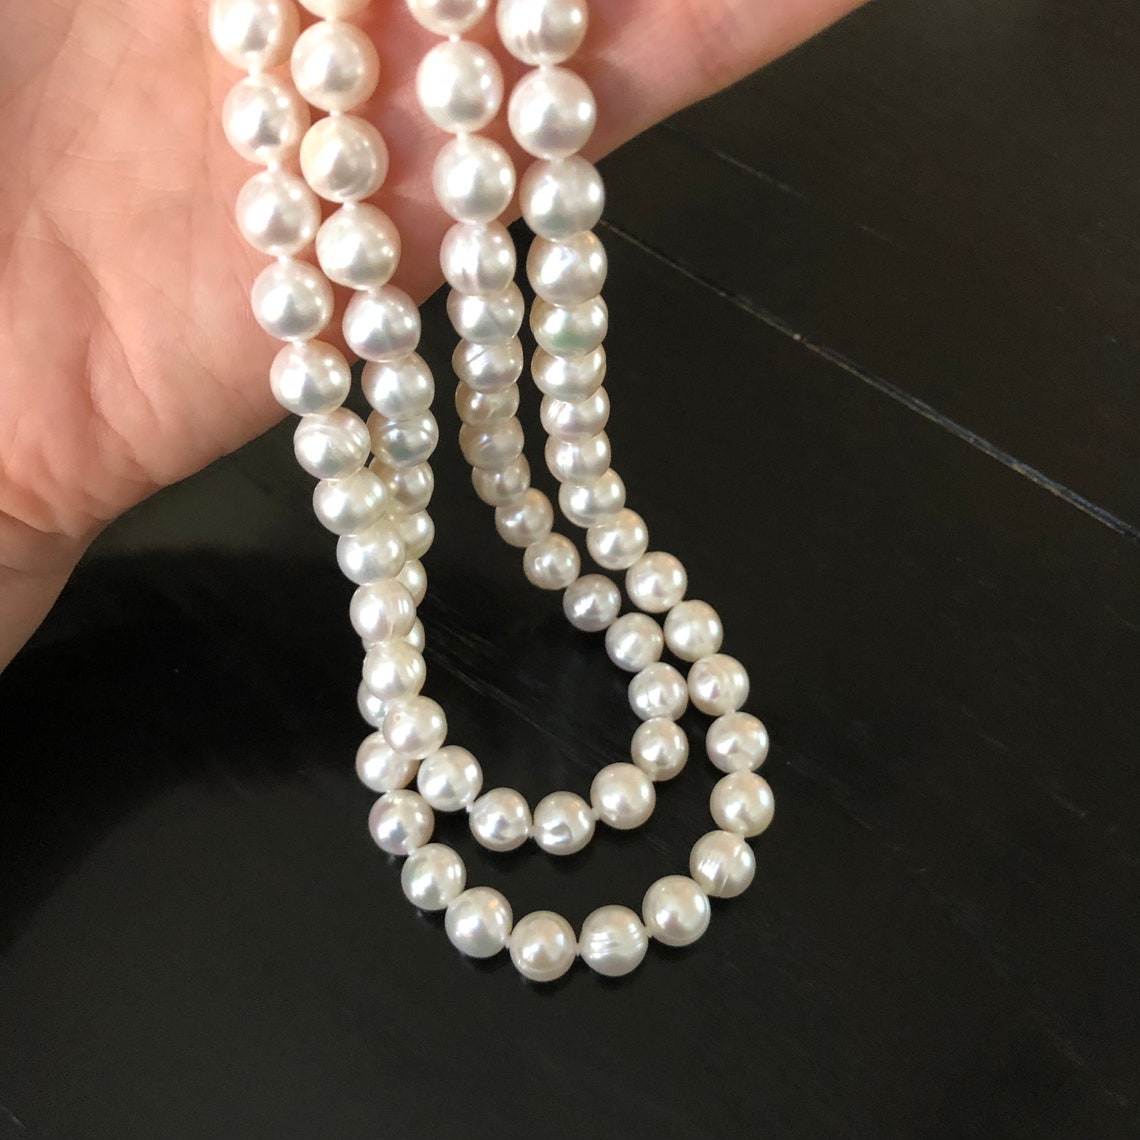 34 Inch 9mm White Freshwater Pearl Necklace Sterling Silver | Etsy